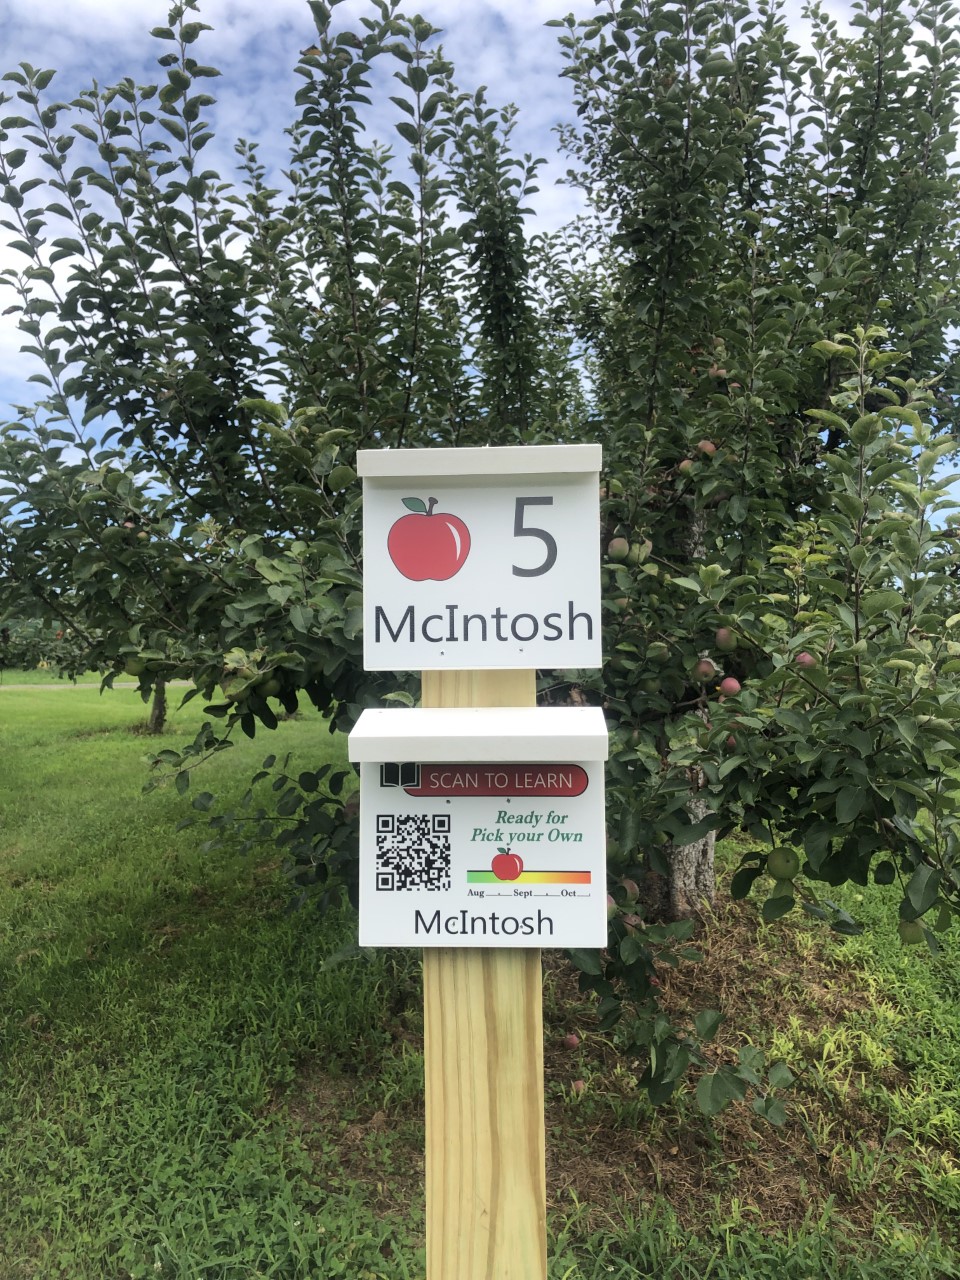 Hope Orchards - McIntosh and Cortland apples- That is what